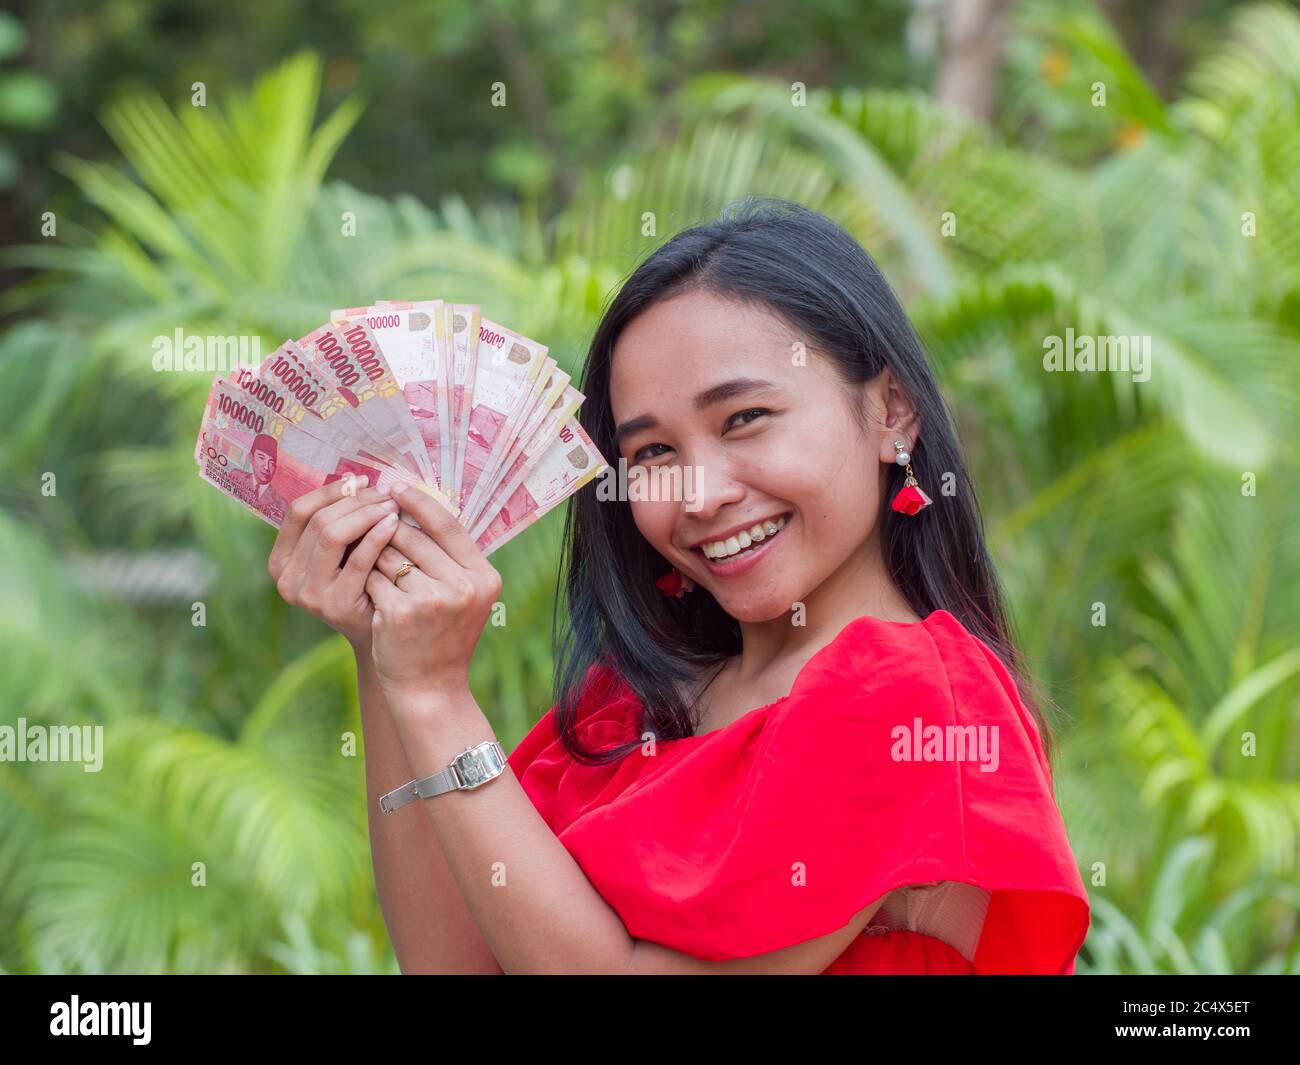 Indonesian money in the hands of an asian girl. Stock Photo